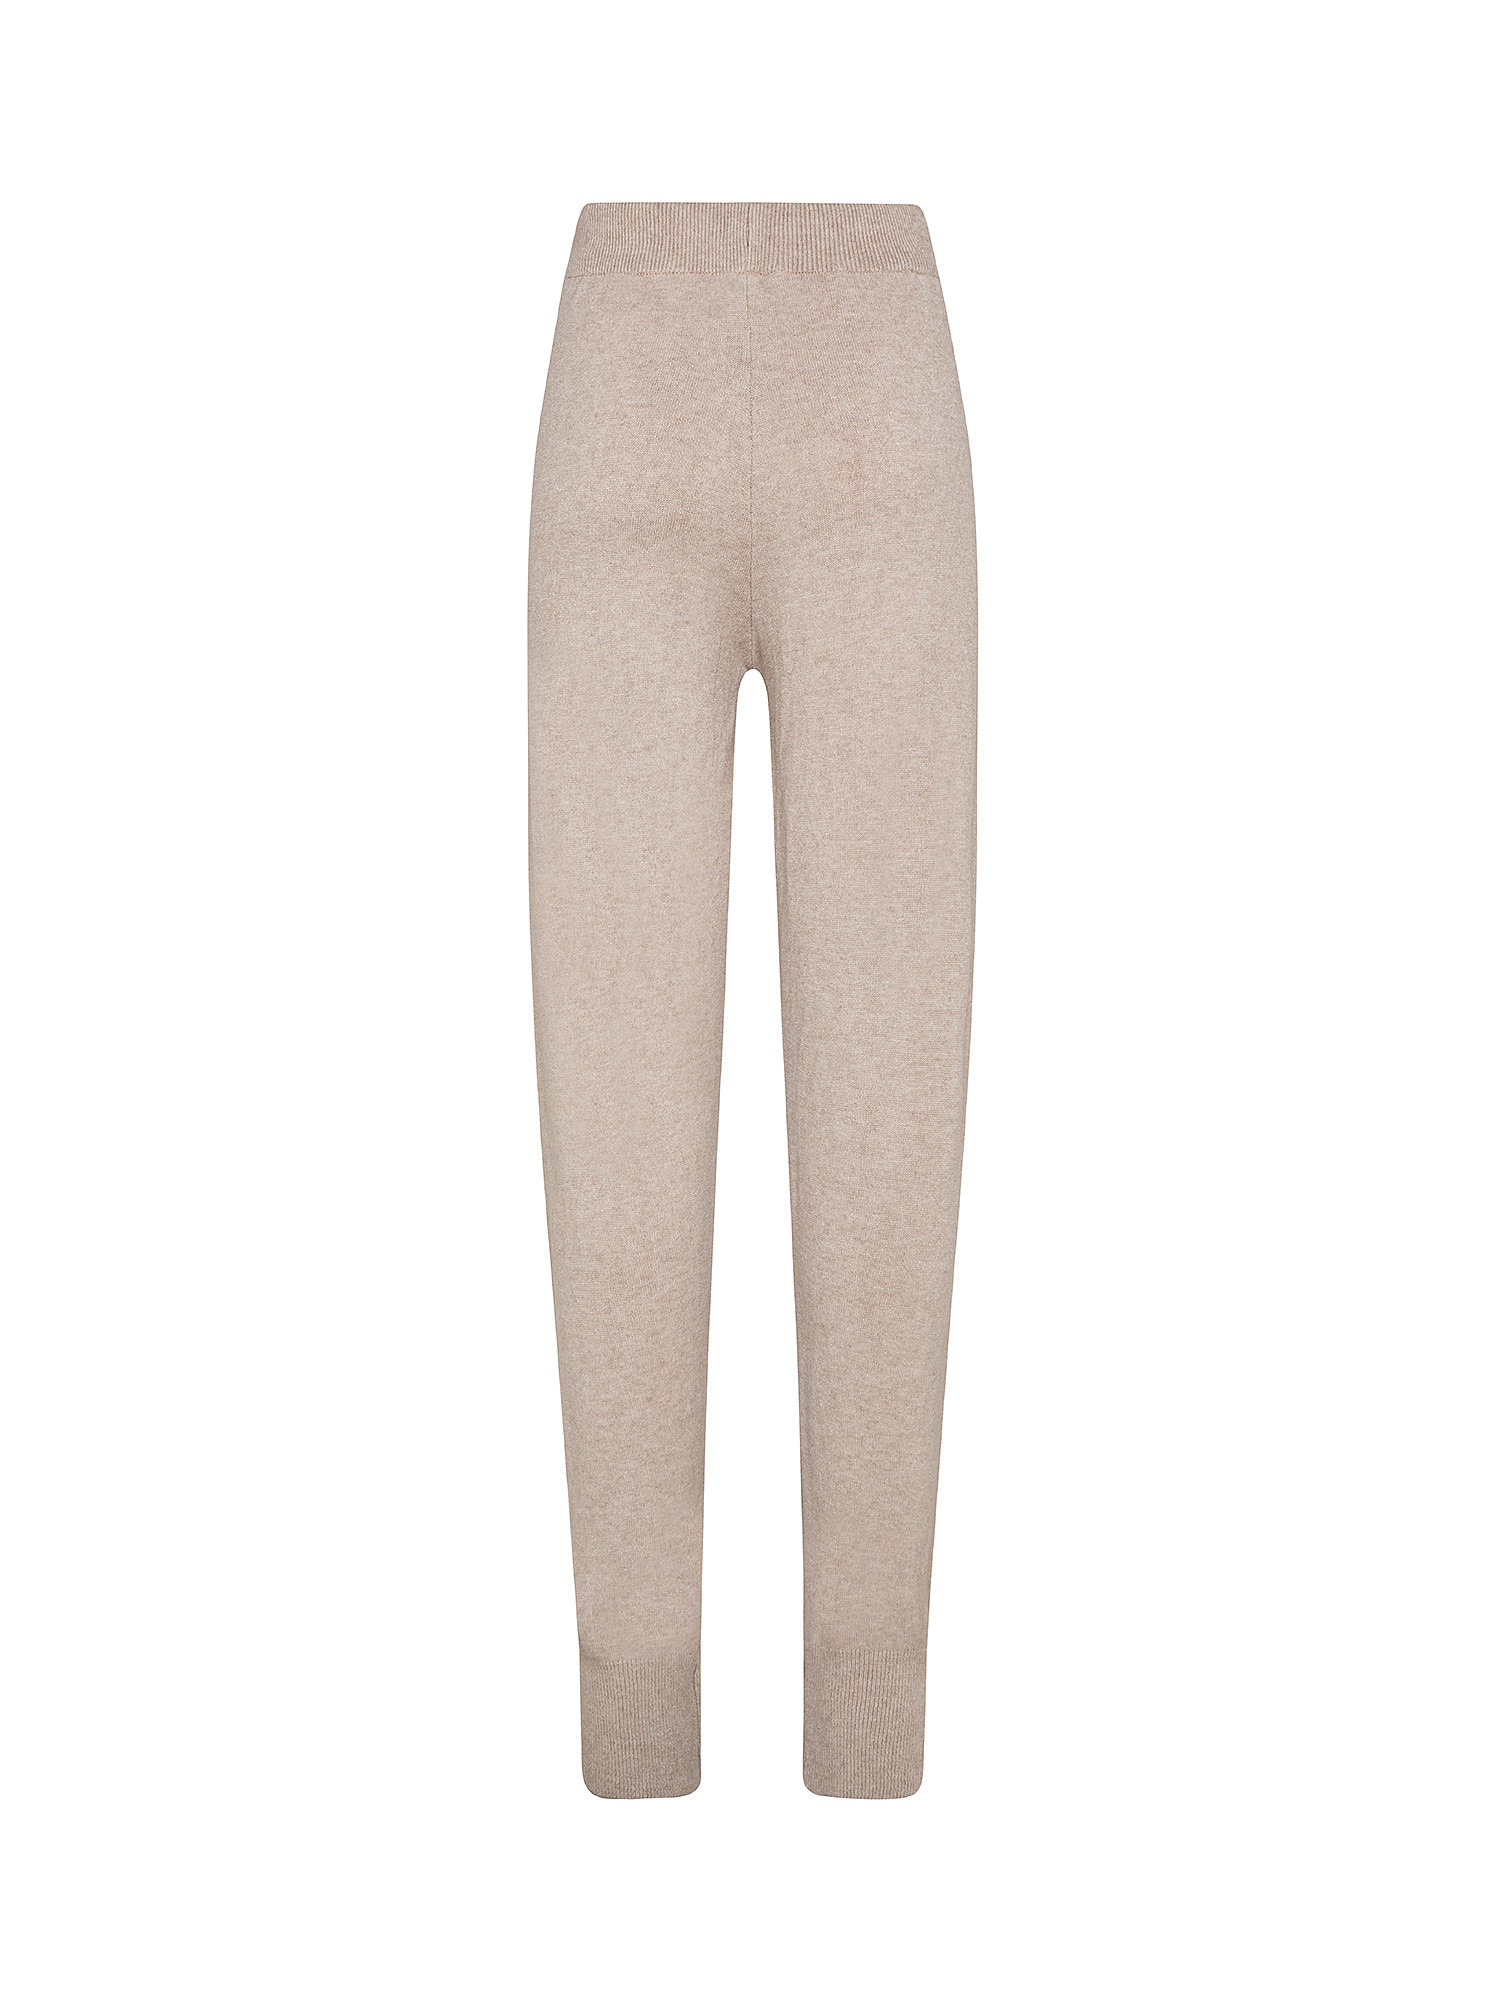 Pantalone in maglia, Beige, large image number 1